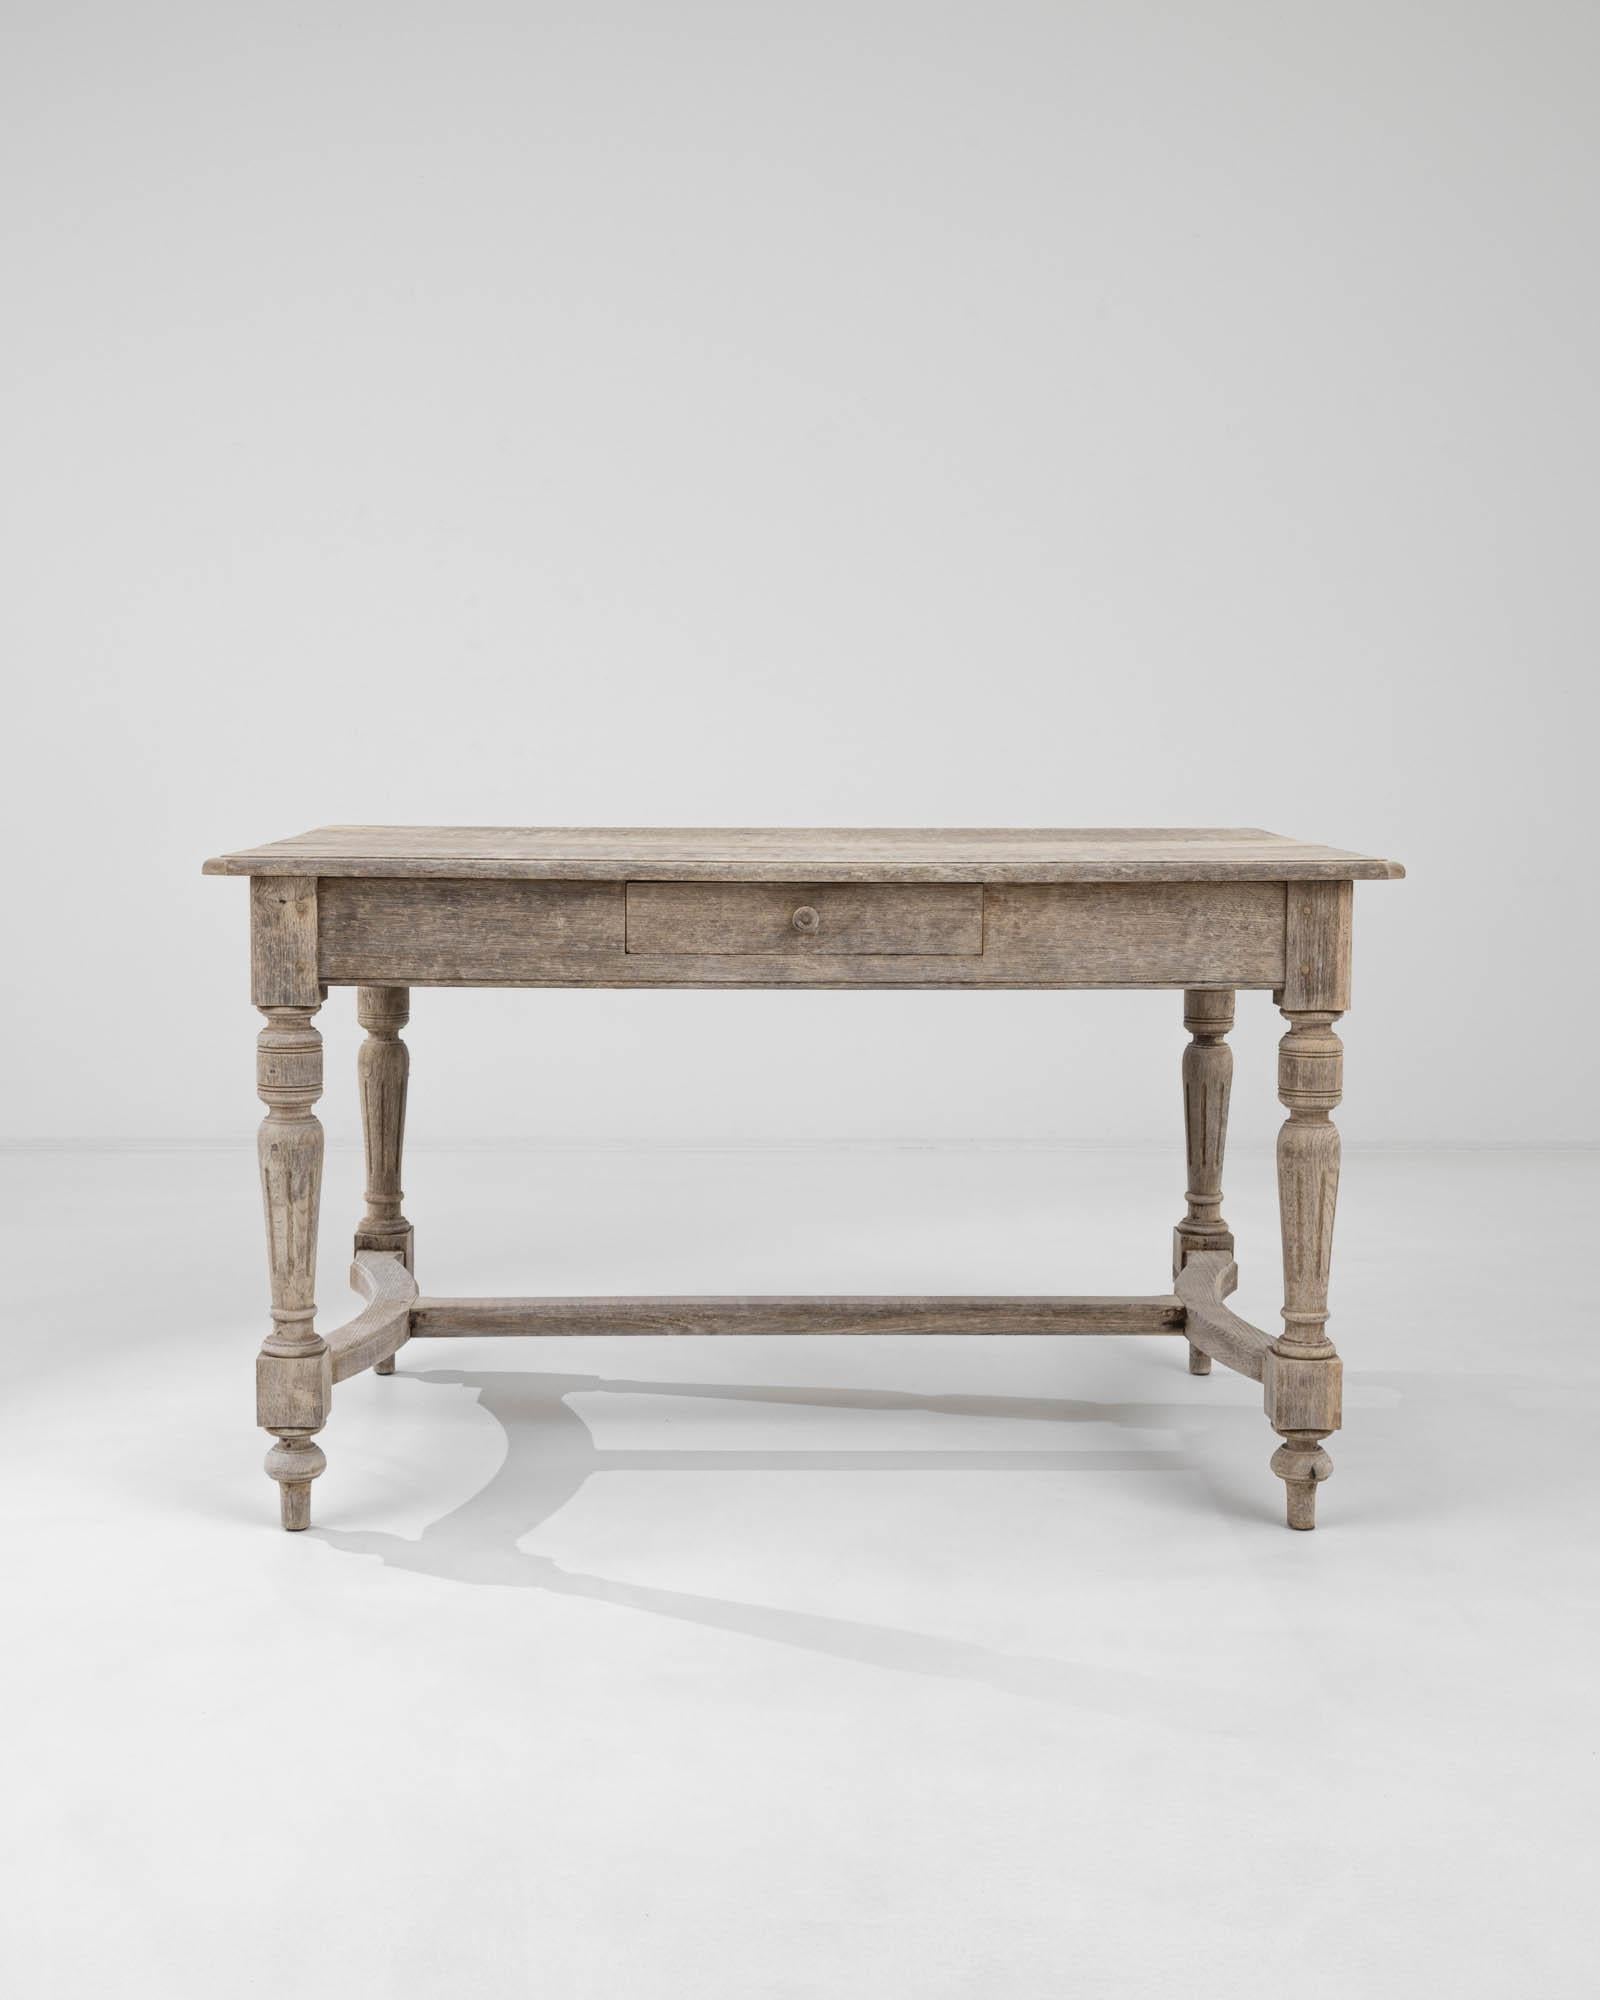 This vintage table in natural oak offers an attractive centerpiece. Built in France at the turn of the century, tapered, fluted legs create a graceful profile, lending a note of Neoclassical elegance to the Provincial design. The curved contours of